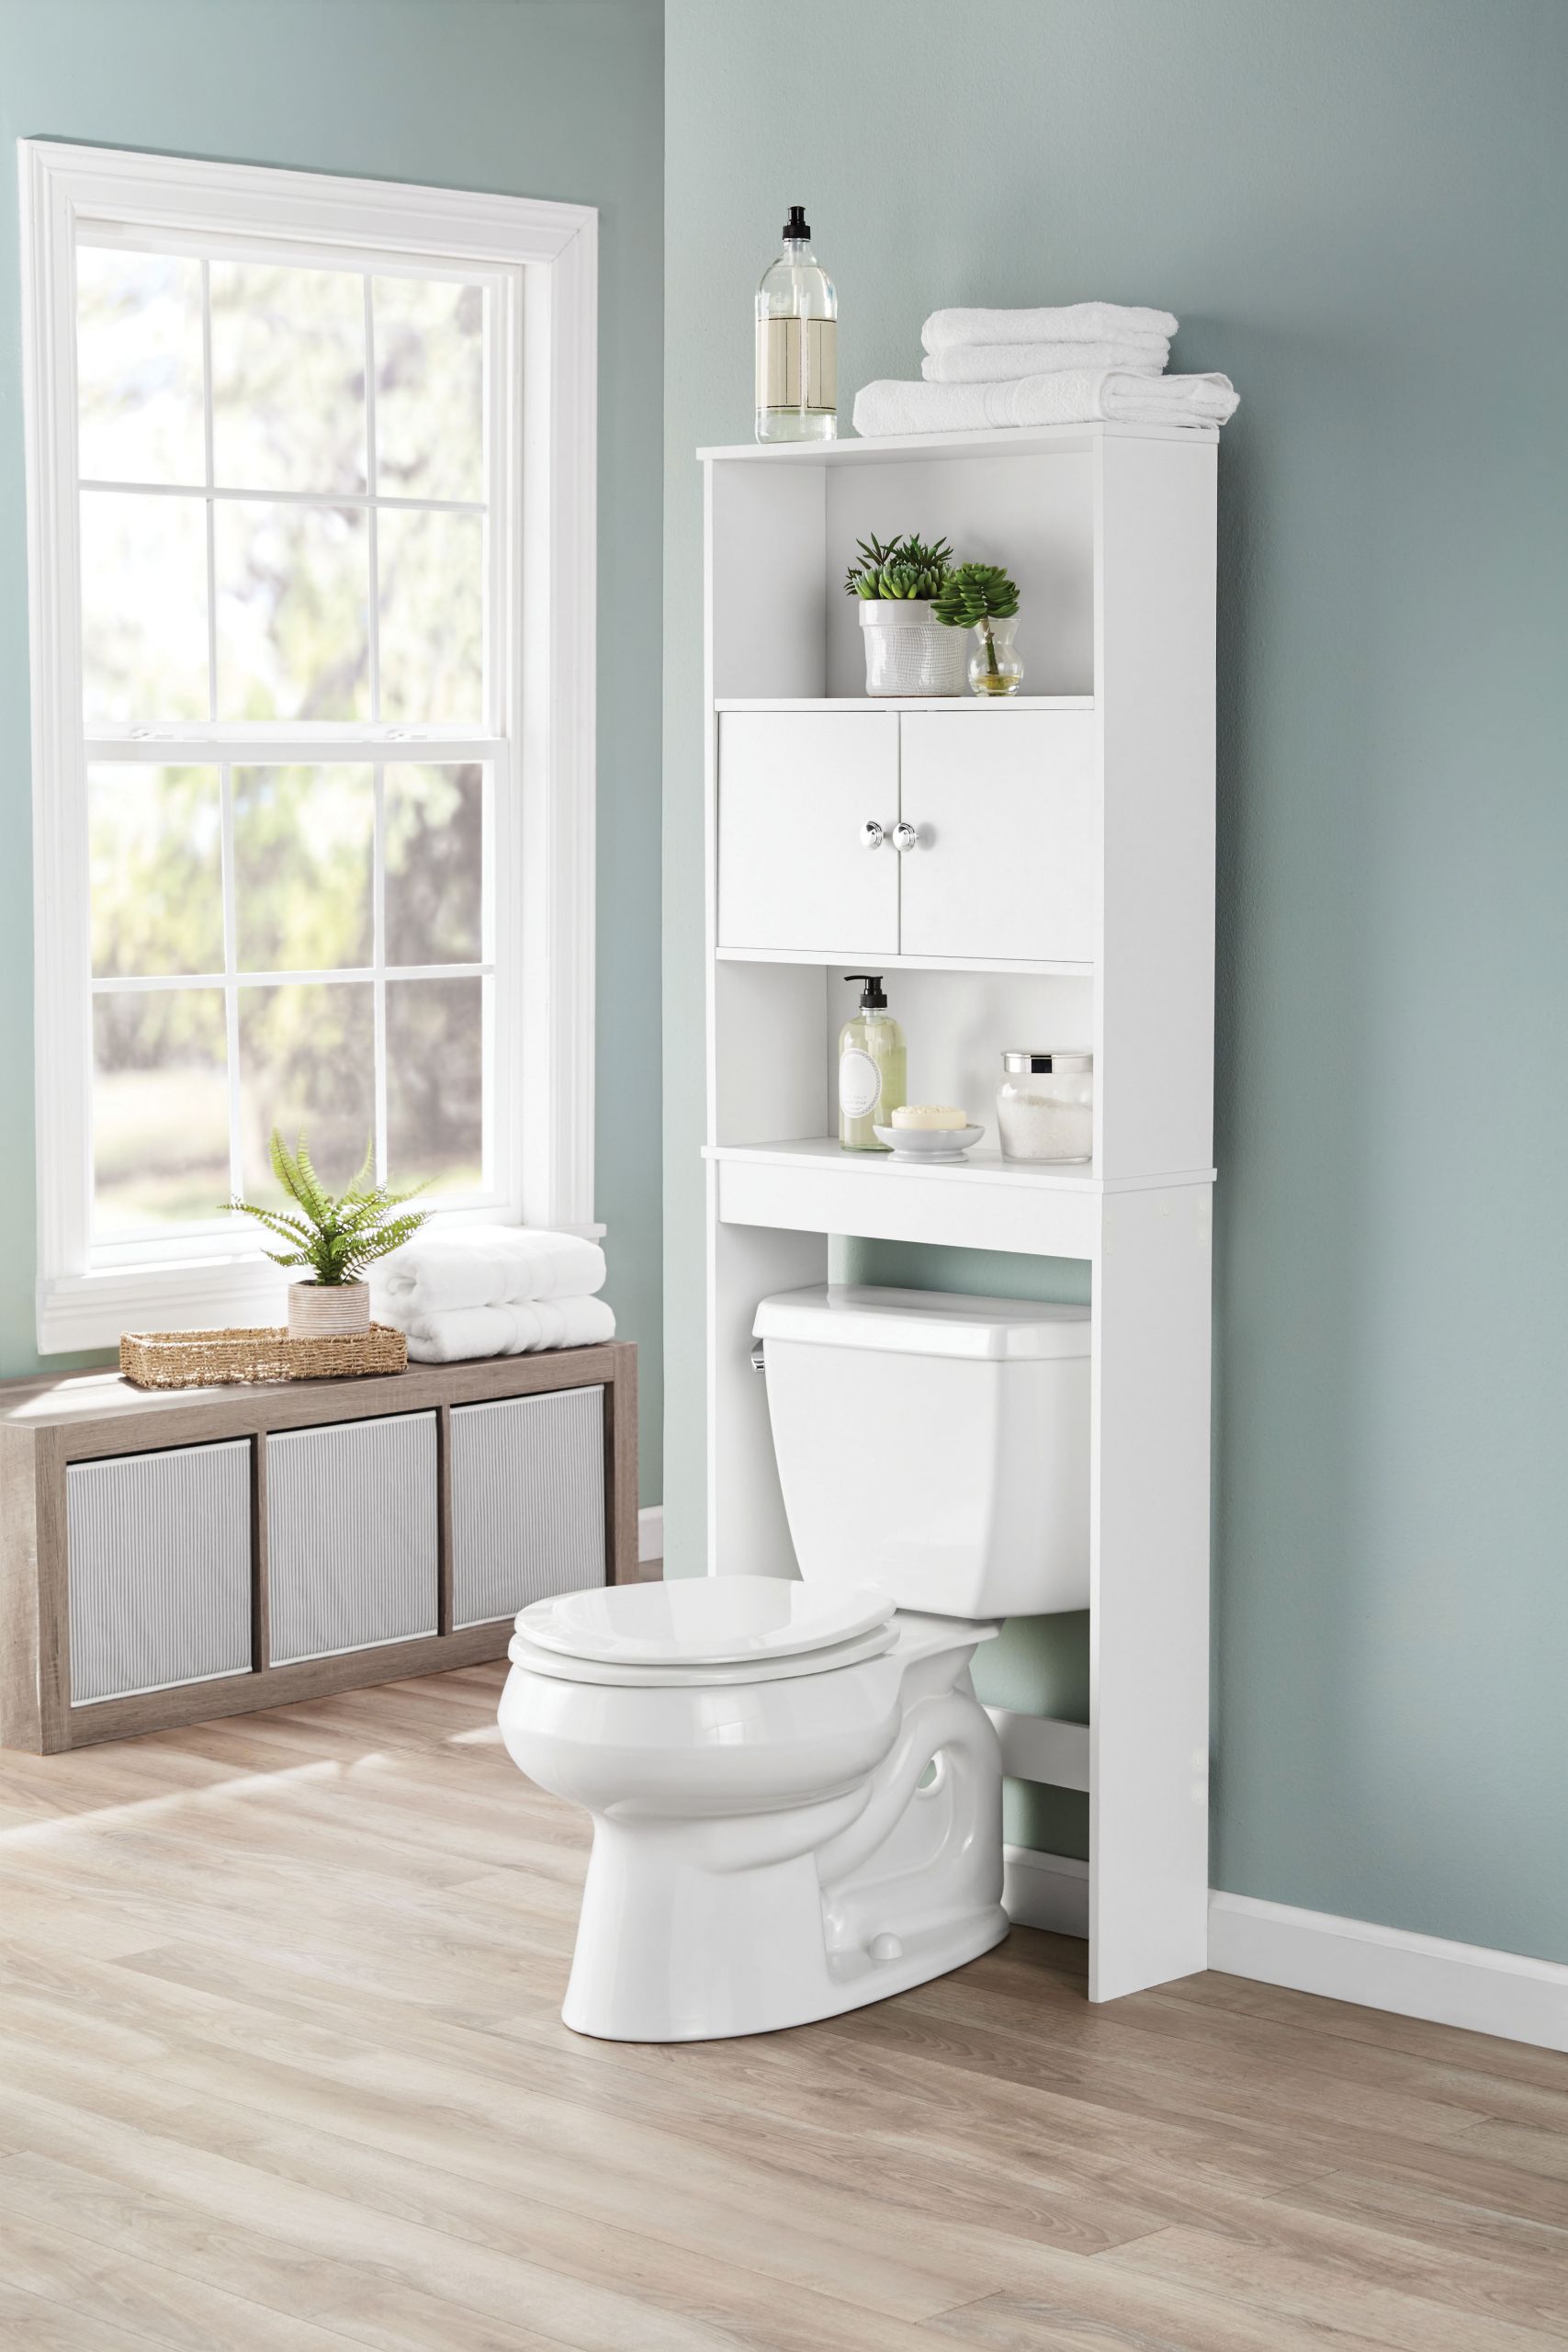 Bathroom Cabinets Over The Toilet
 Over The Toilet Storage Organizer Wood Bathroom Space